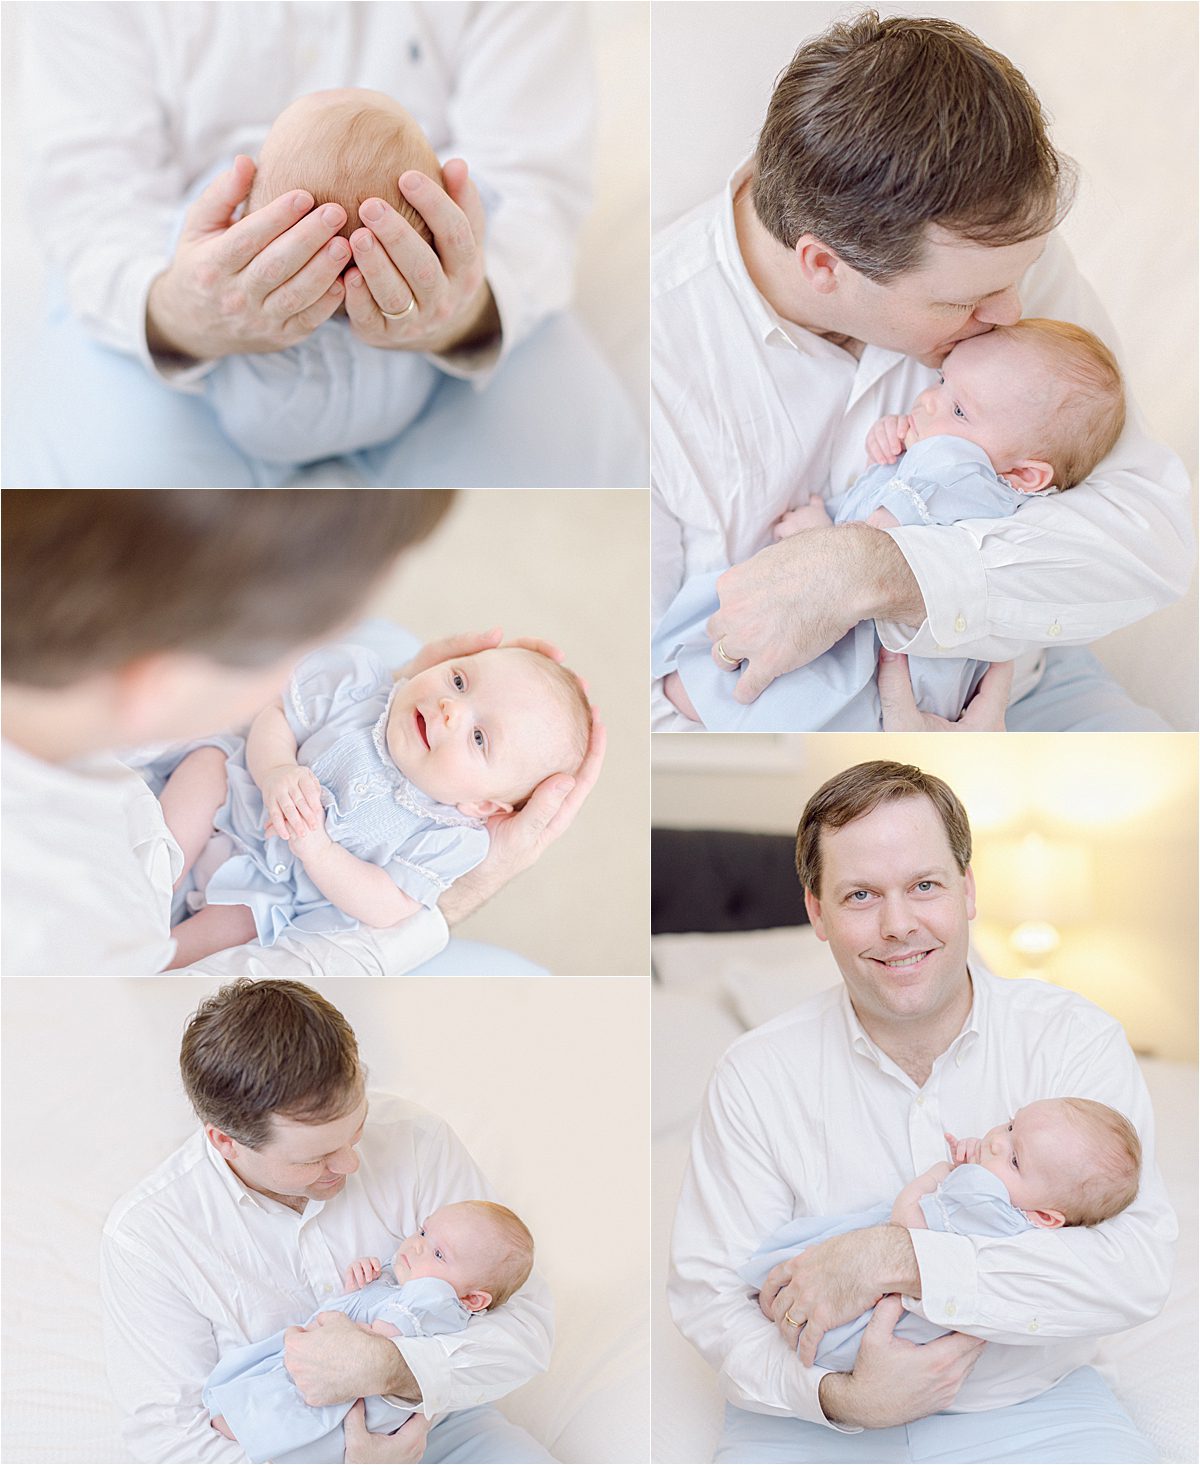 Fatherhood Family with newborn photography taken at home in Athens, GA